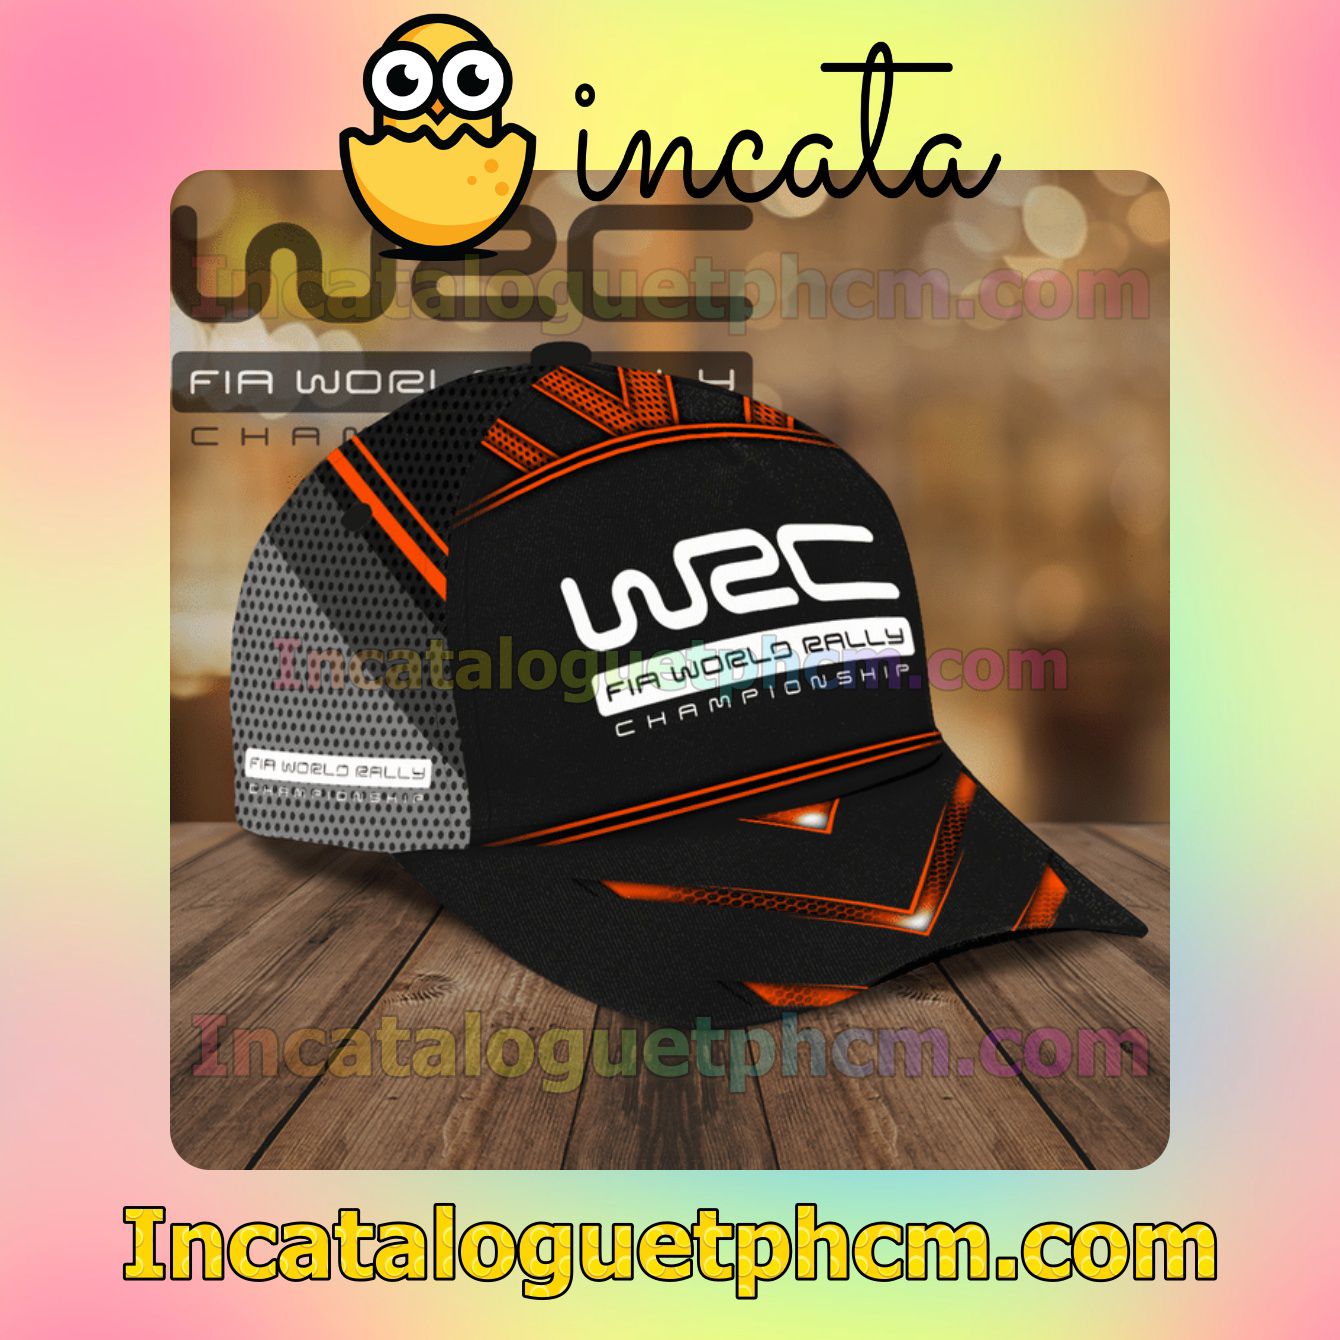 Best Gift Wrc Fia World Rally Championship Classic Hat Caps Gift For Men